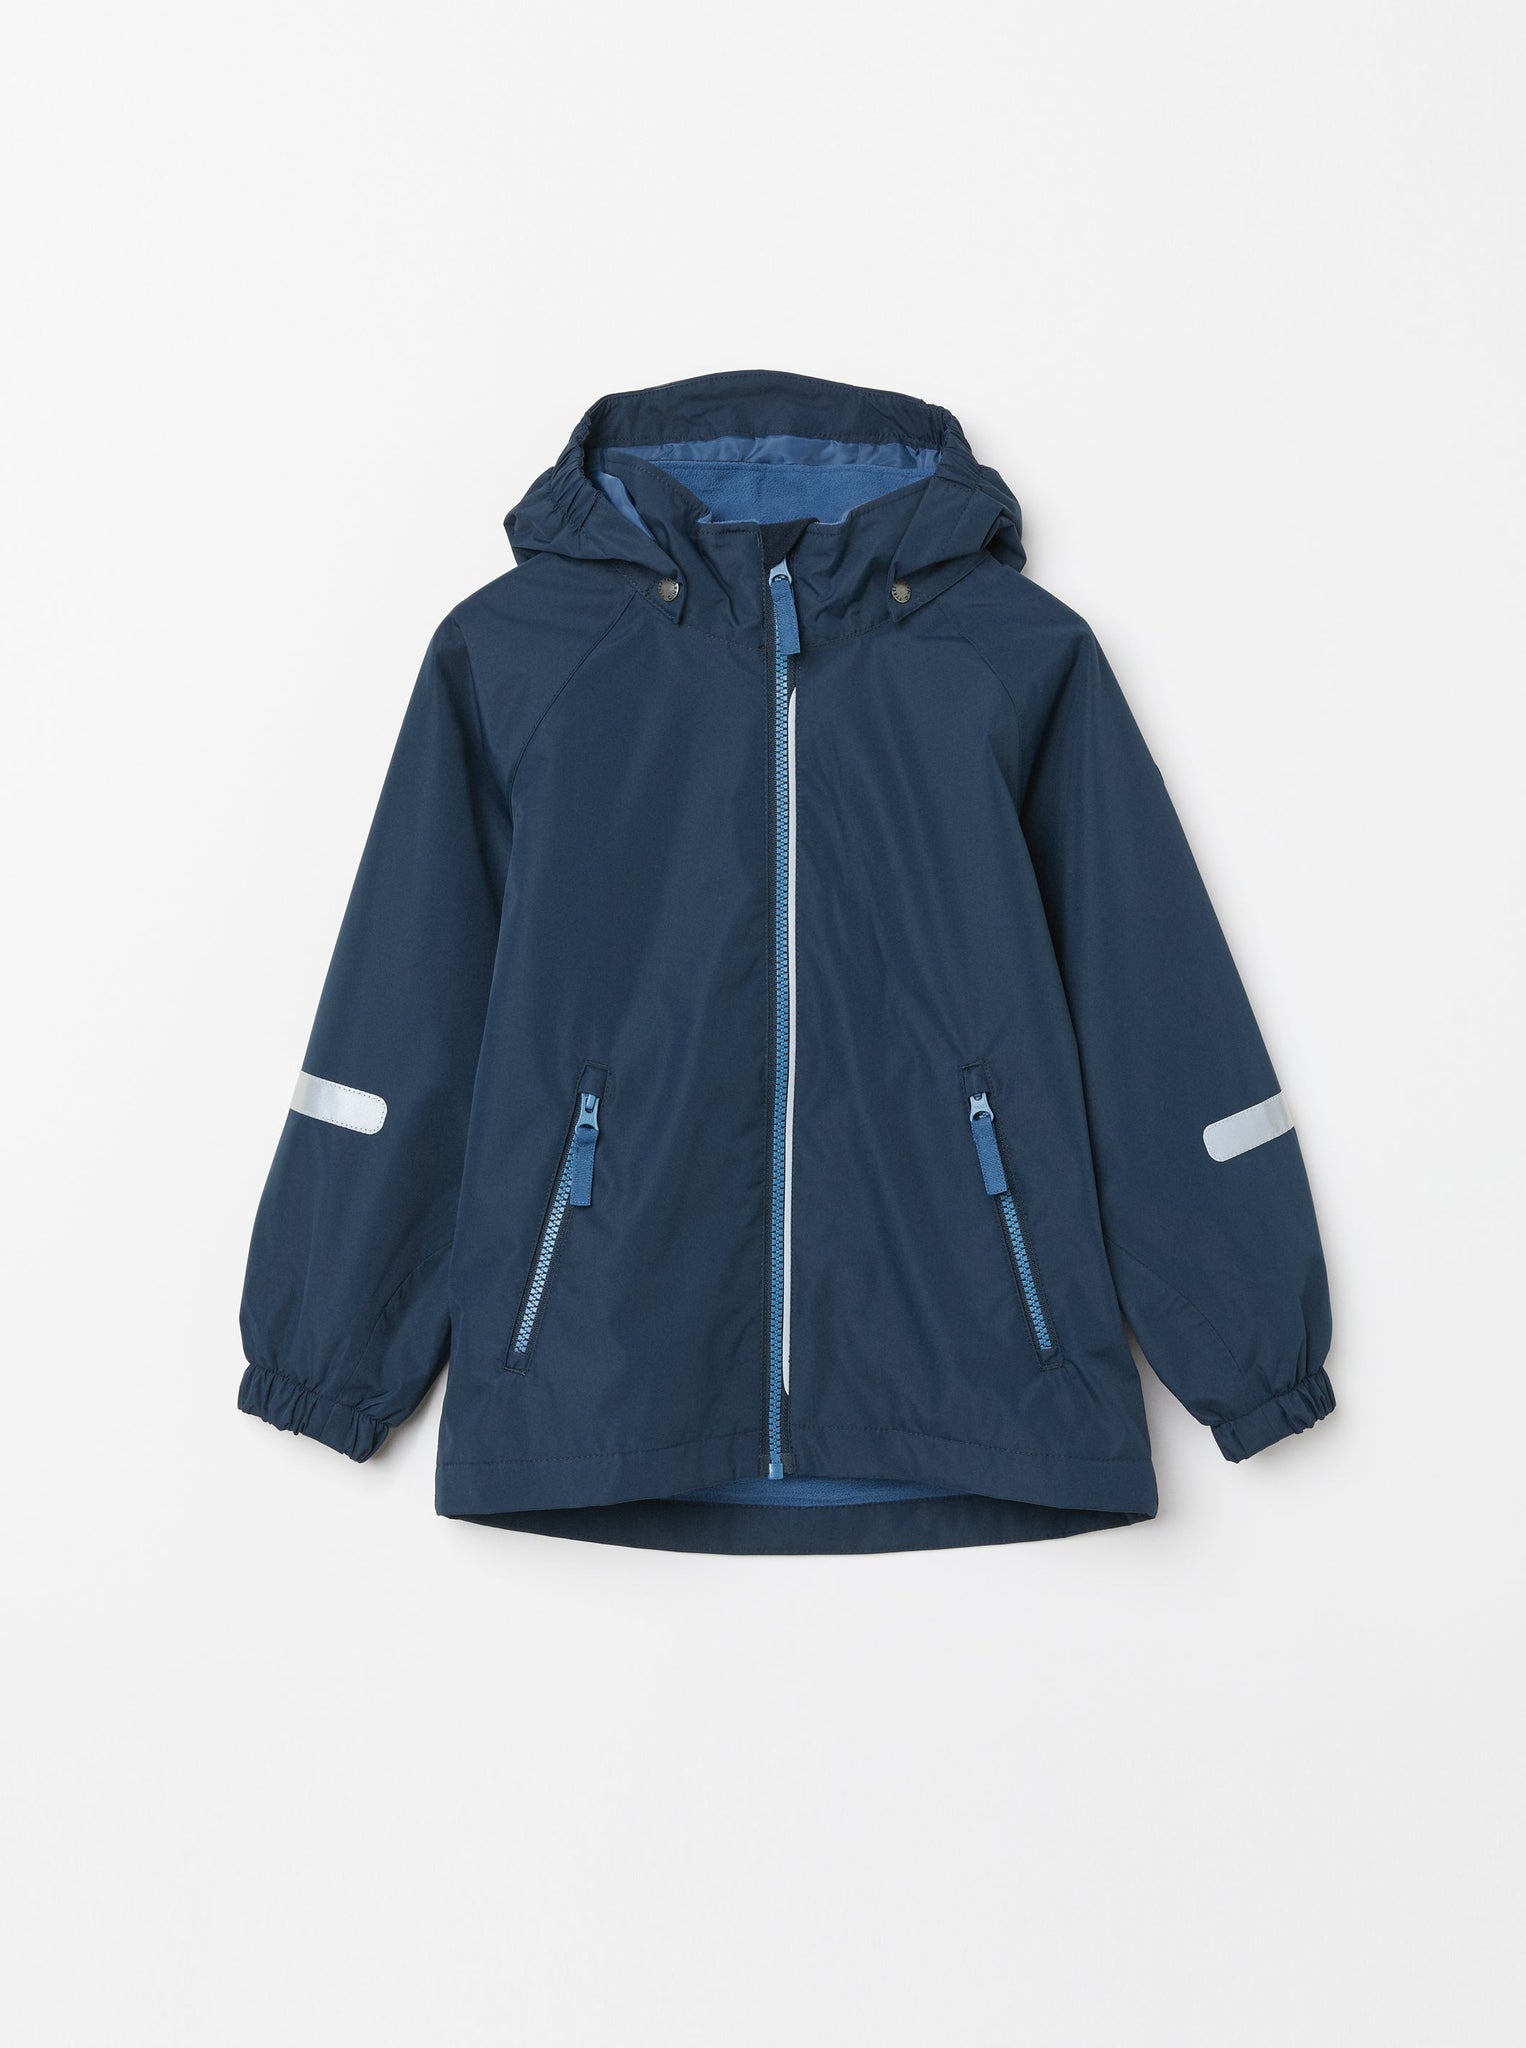 Navy Lightweight Kids Waterproof Coat from the Polarn O. Pyret kidswear collection. Sustainably produced kids outerwear.